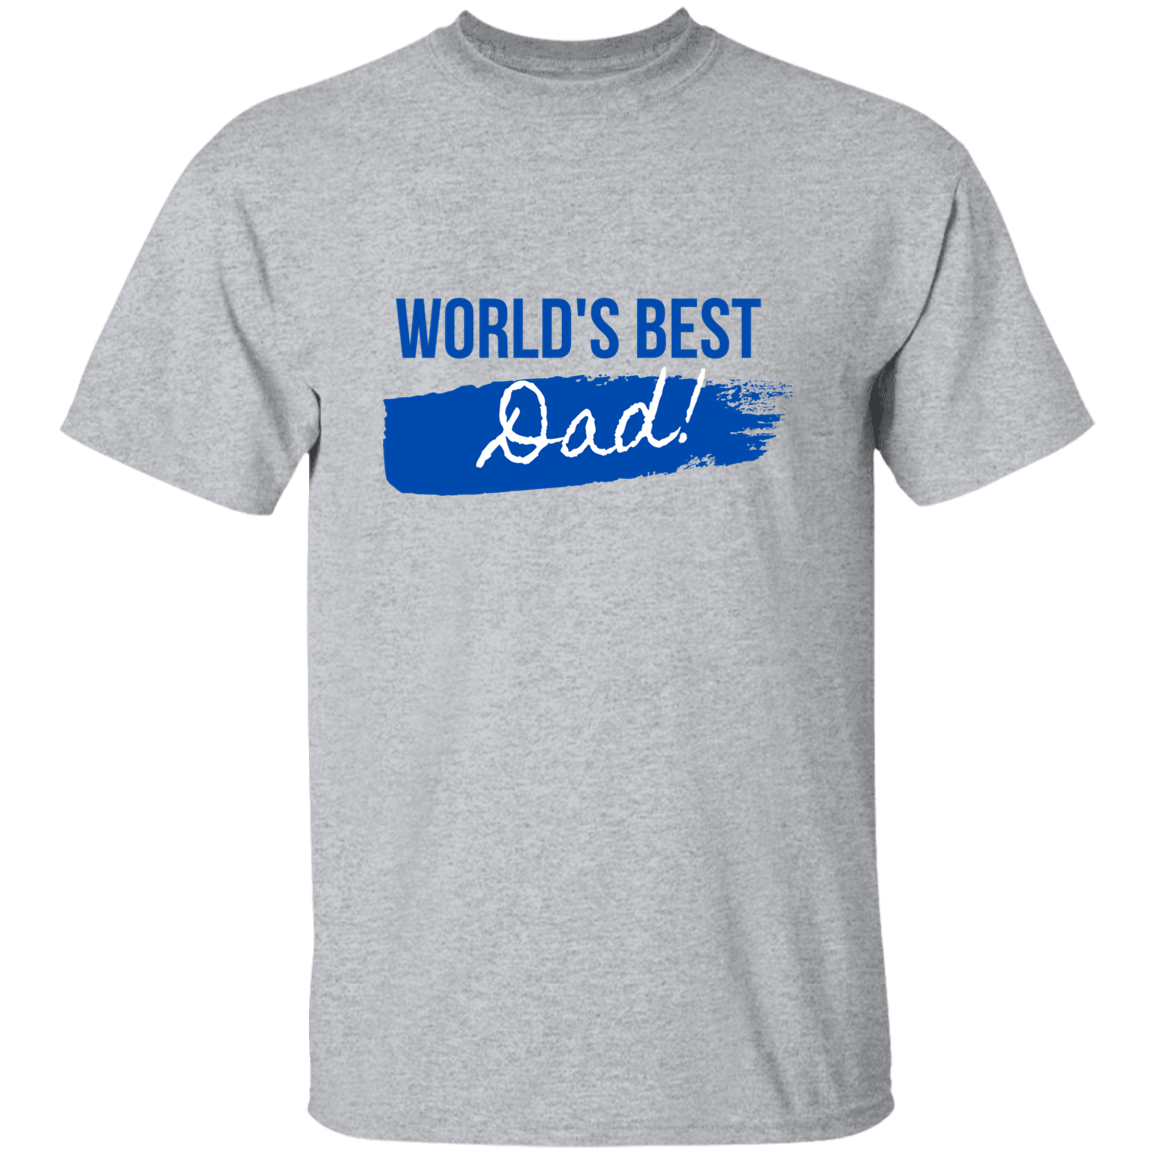 Father | T-Shirt | World's Best Dad | Assorted Colors